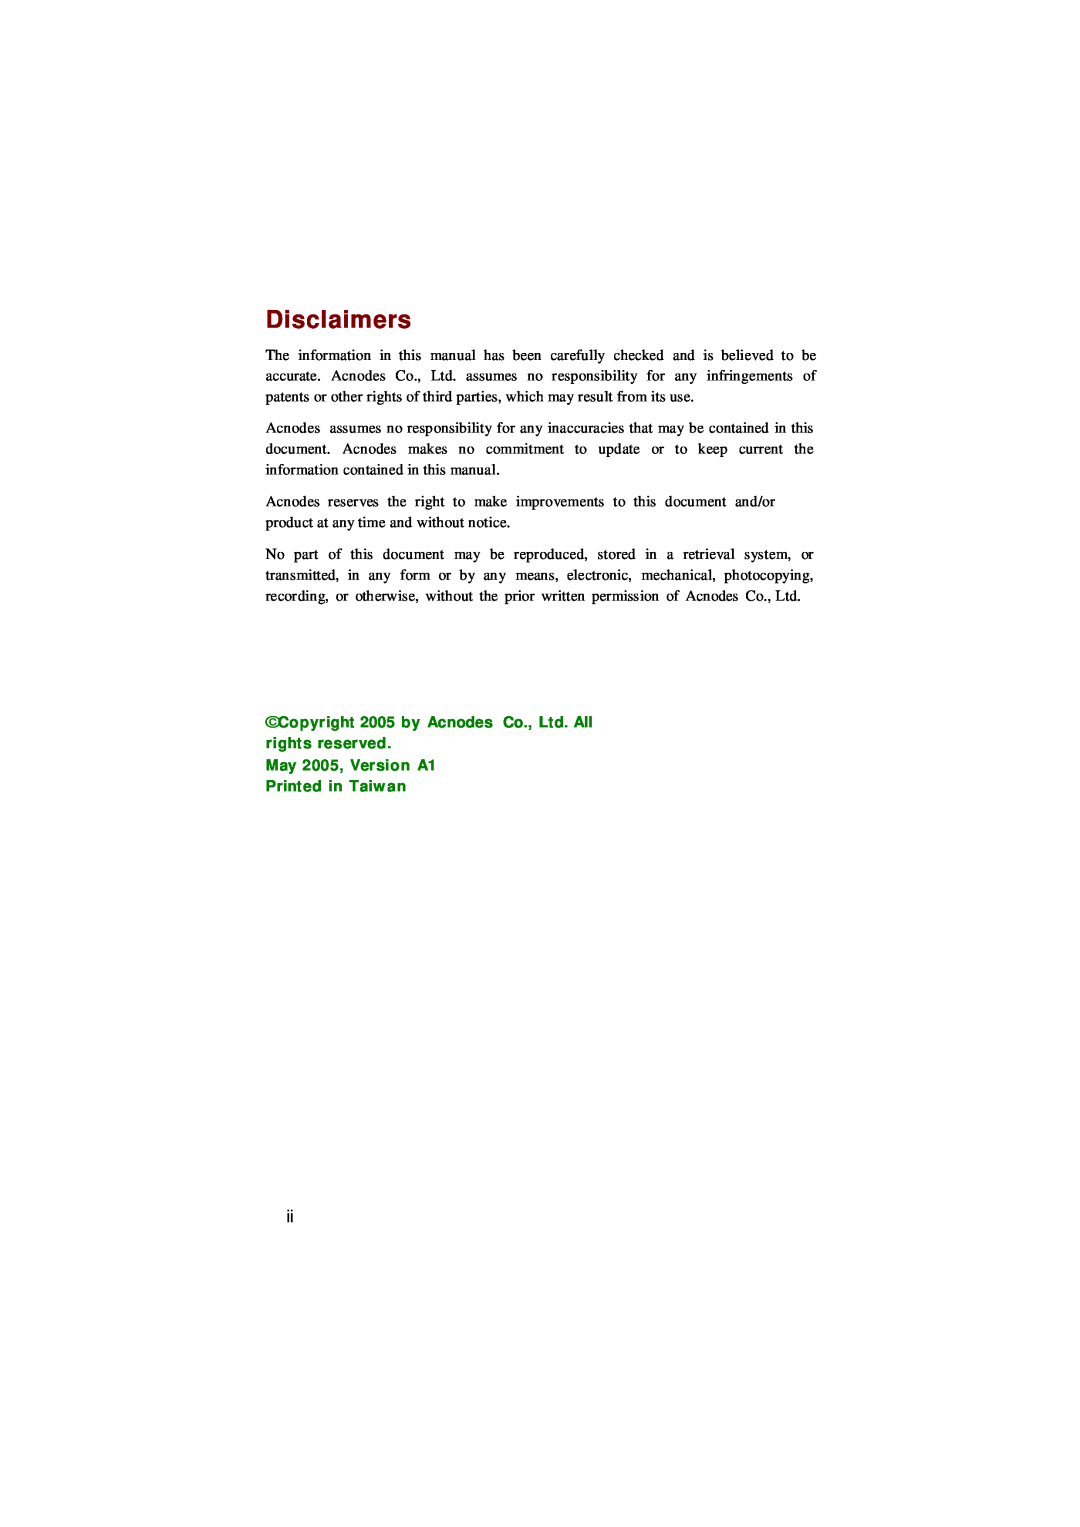 Acnodes FPC 8084 user manual Disclaimers, May 2005, Version A1 Printed in Taiw an 